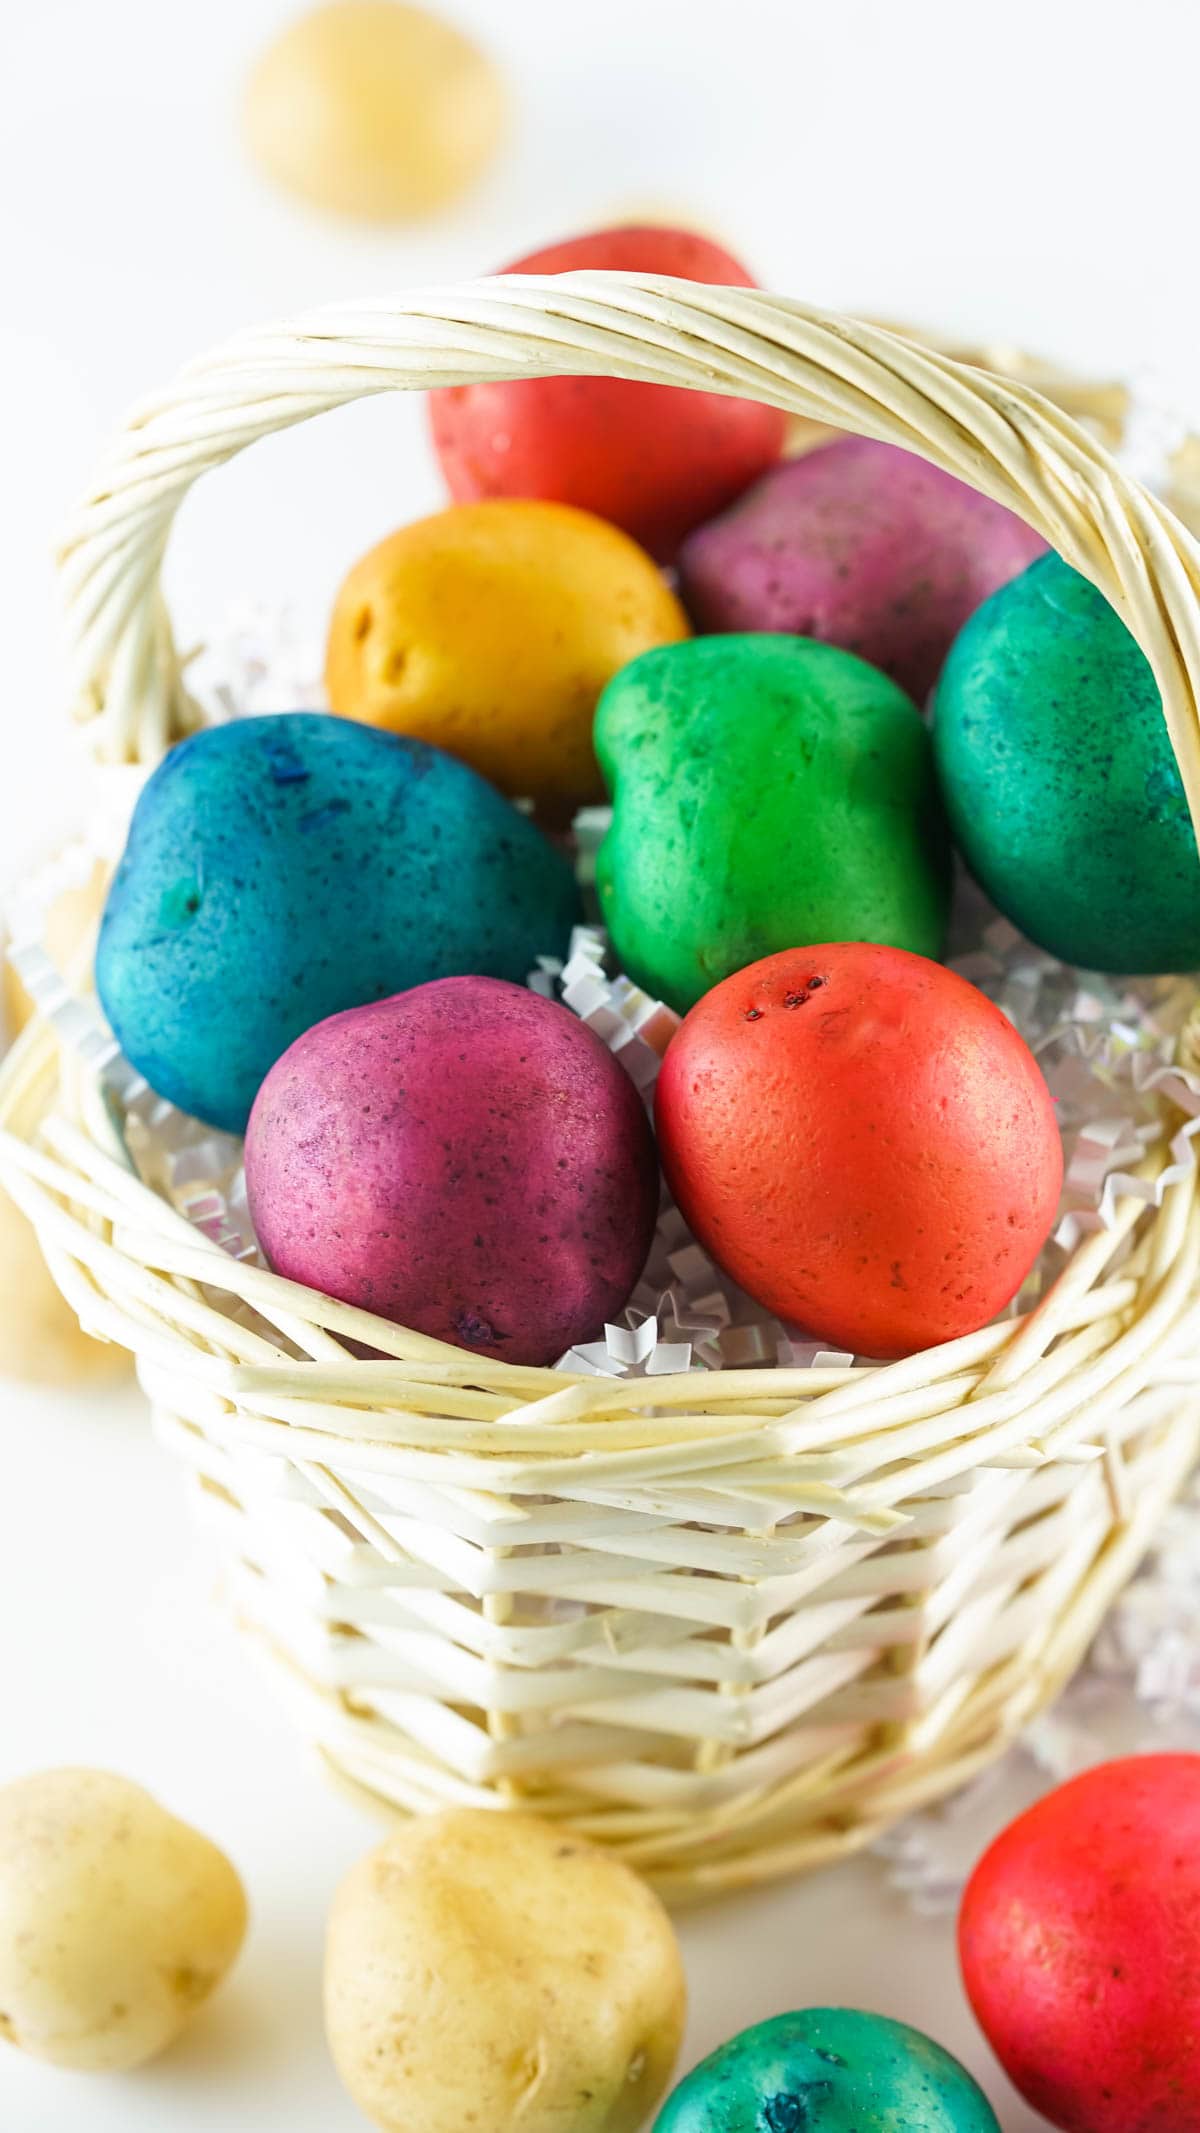 Dyed potatoes in basket